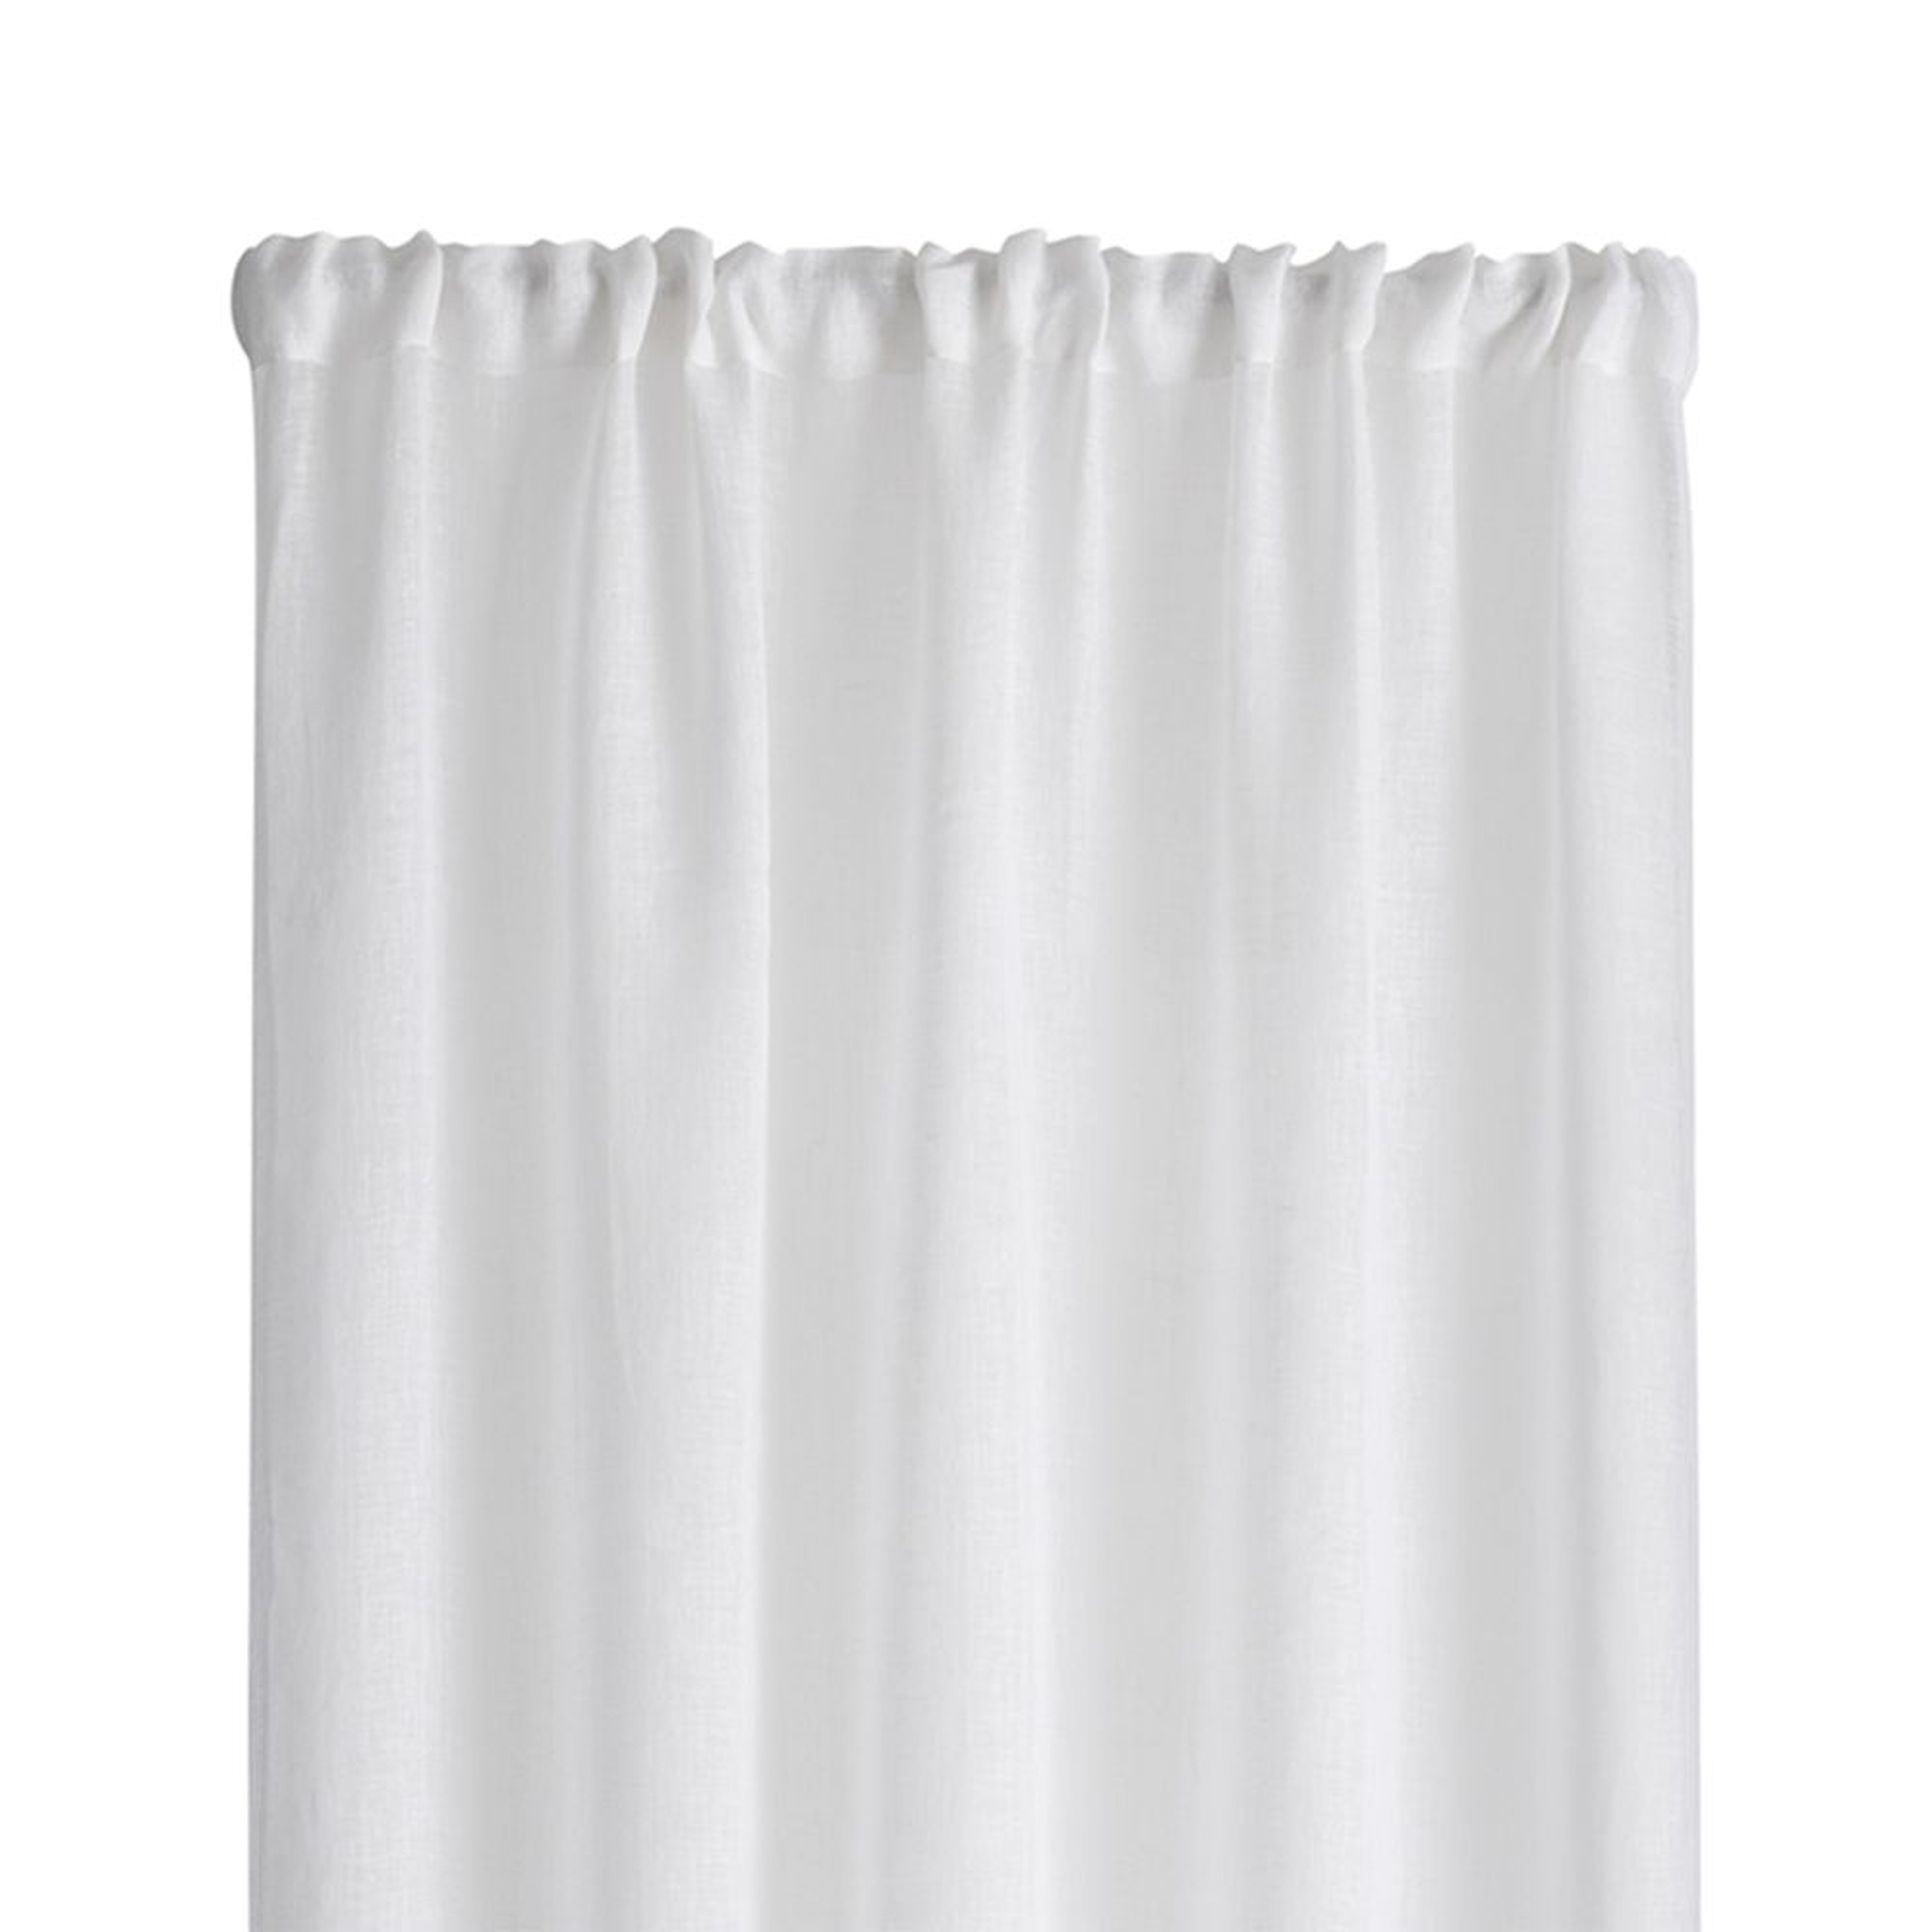 White Linen Sheer 52"x108" Curtain Panel - Crate and Barrel